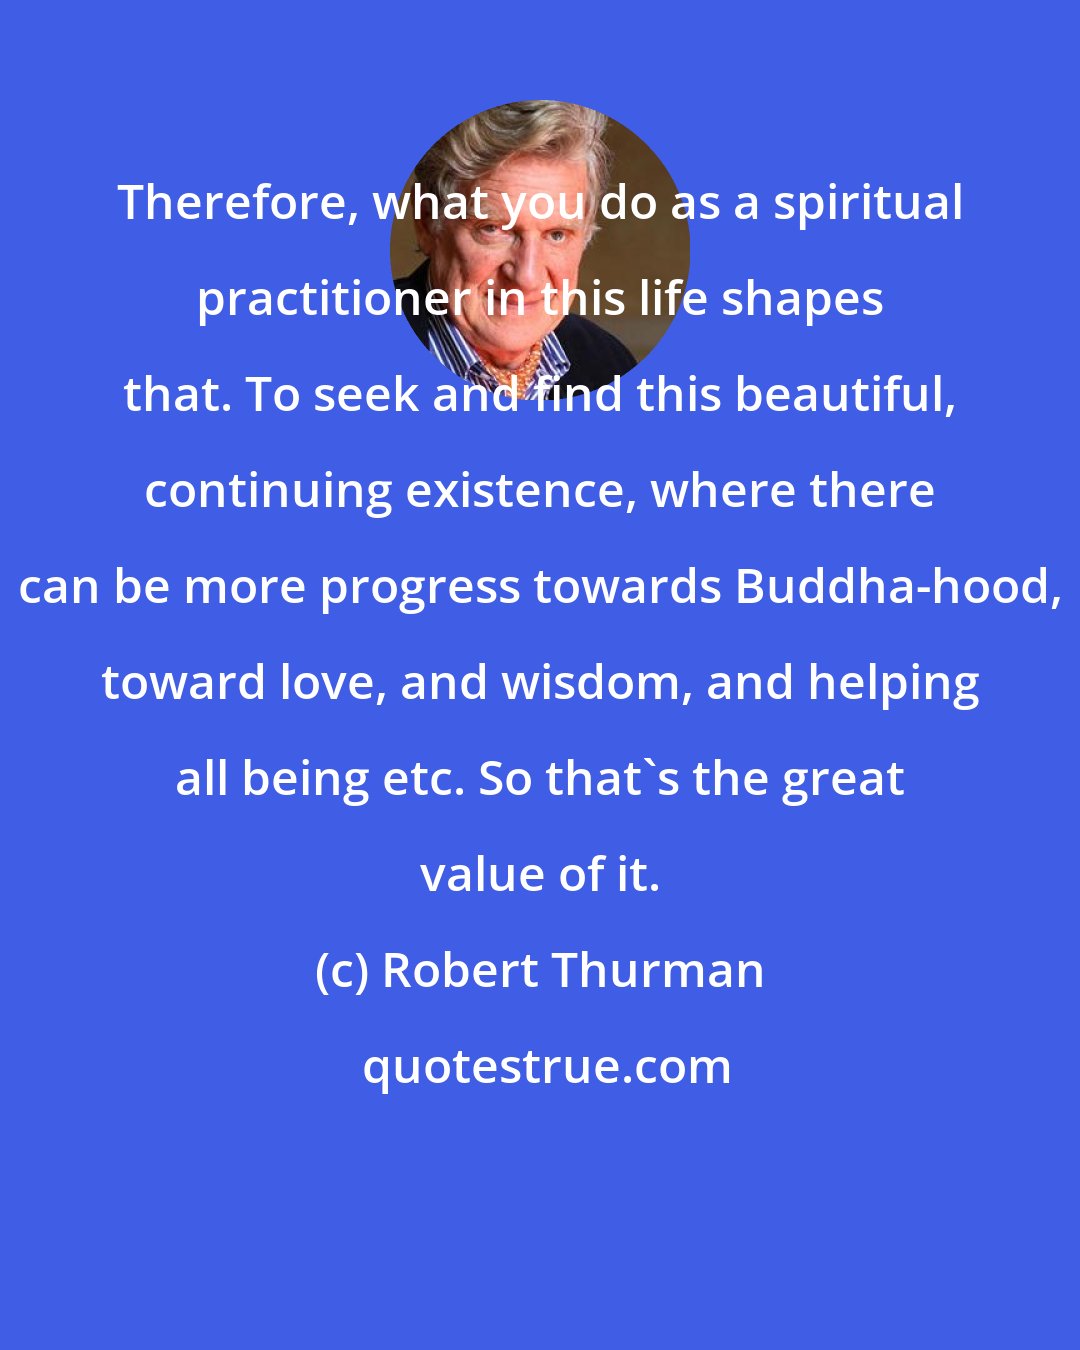 Robert Thurman: Therefore, what you do as a spiritual practitioner in this life shapes that. To seek and find this beautiful, continuing existence, where there can be more progress towards Buddha-hood, toward love, and wisdom, and helping all being etc. So that's the great value of it.